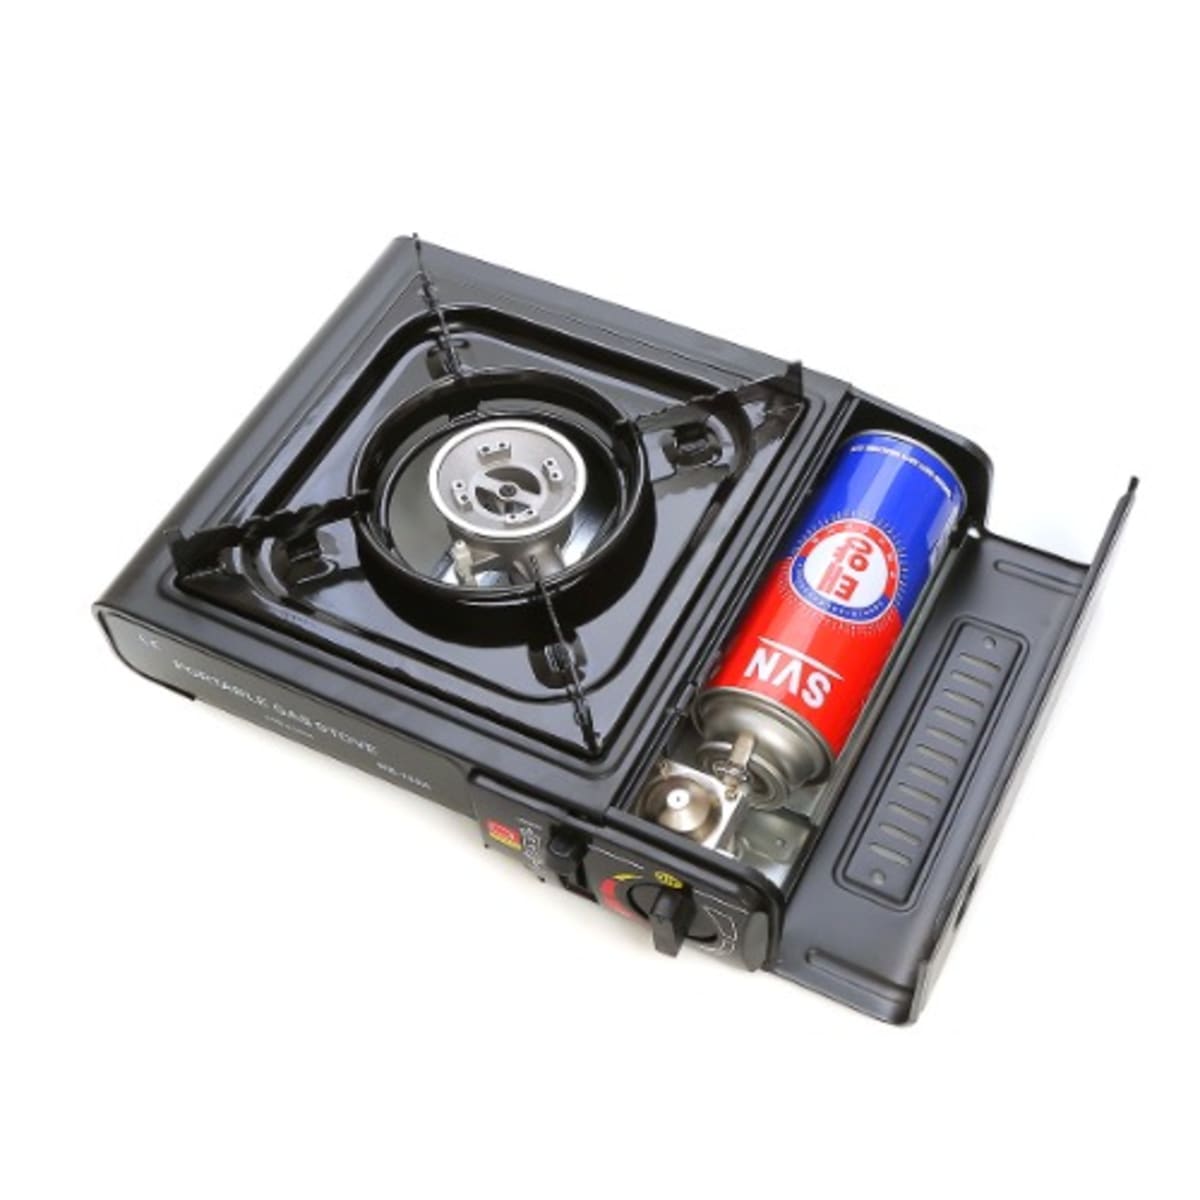 Portable Gas Stove With 1 Free Gas Cartridge- 34 X 26cm